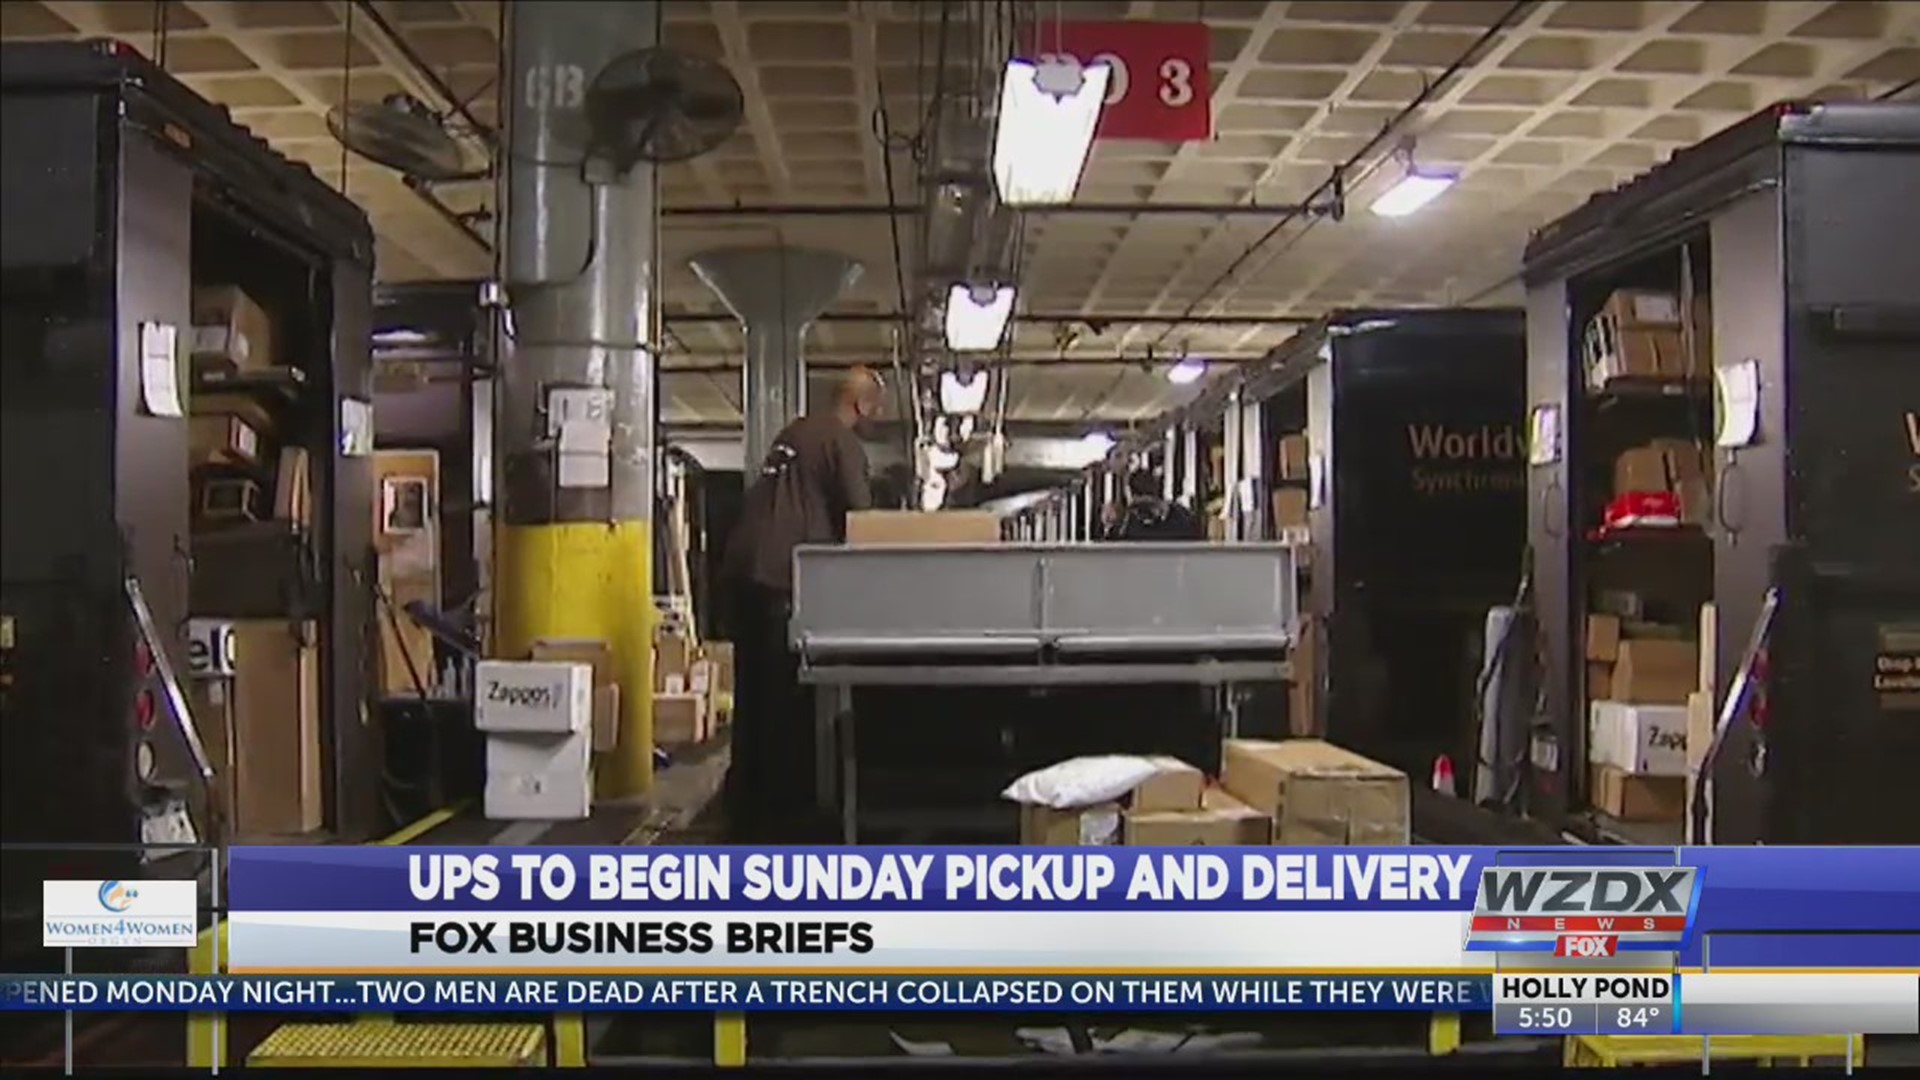 UPS is looking to deliver joy all week long, there's a new meatless breakfast option at Dunkin', and margarita drinkers are celebrating National Tequila Day.